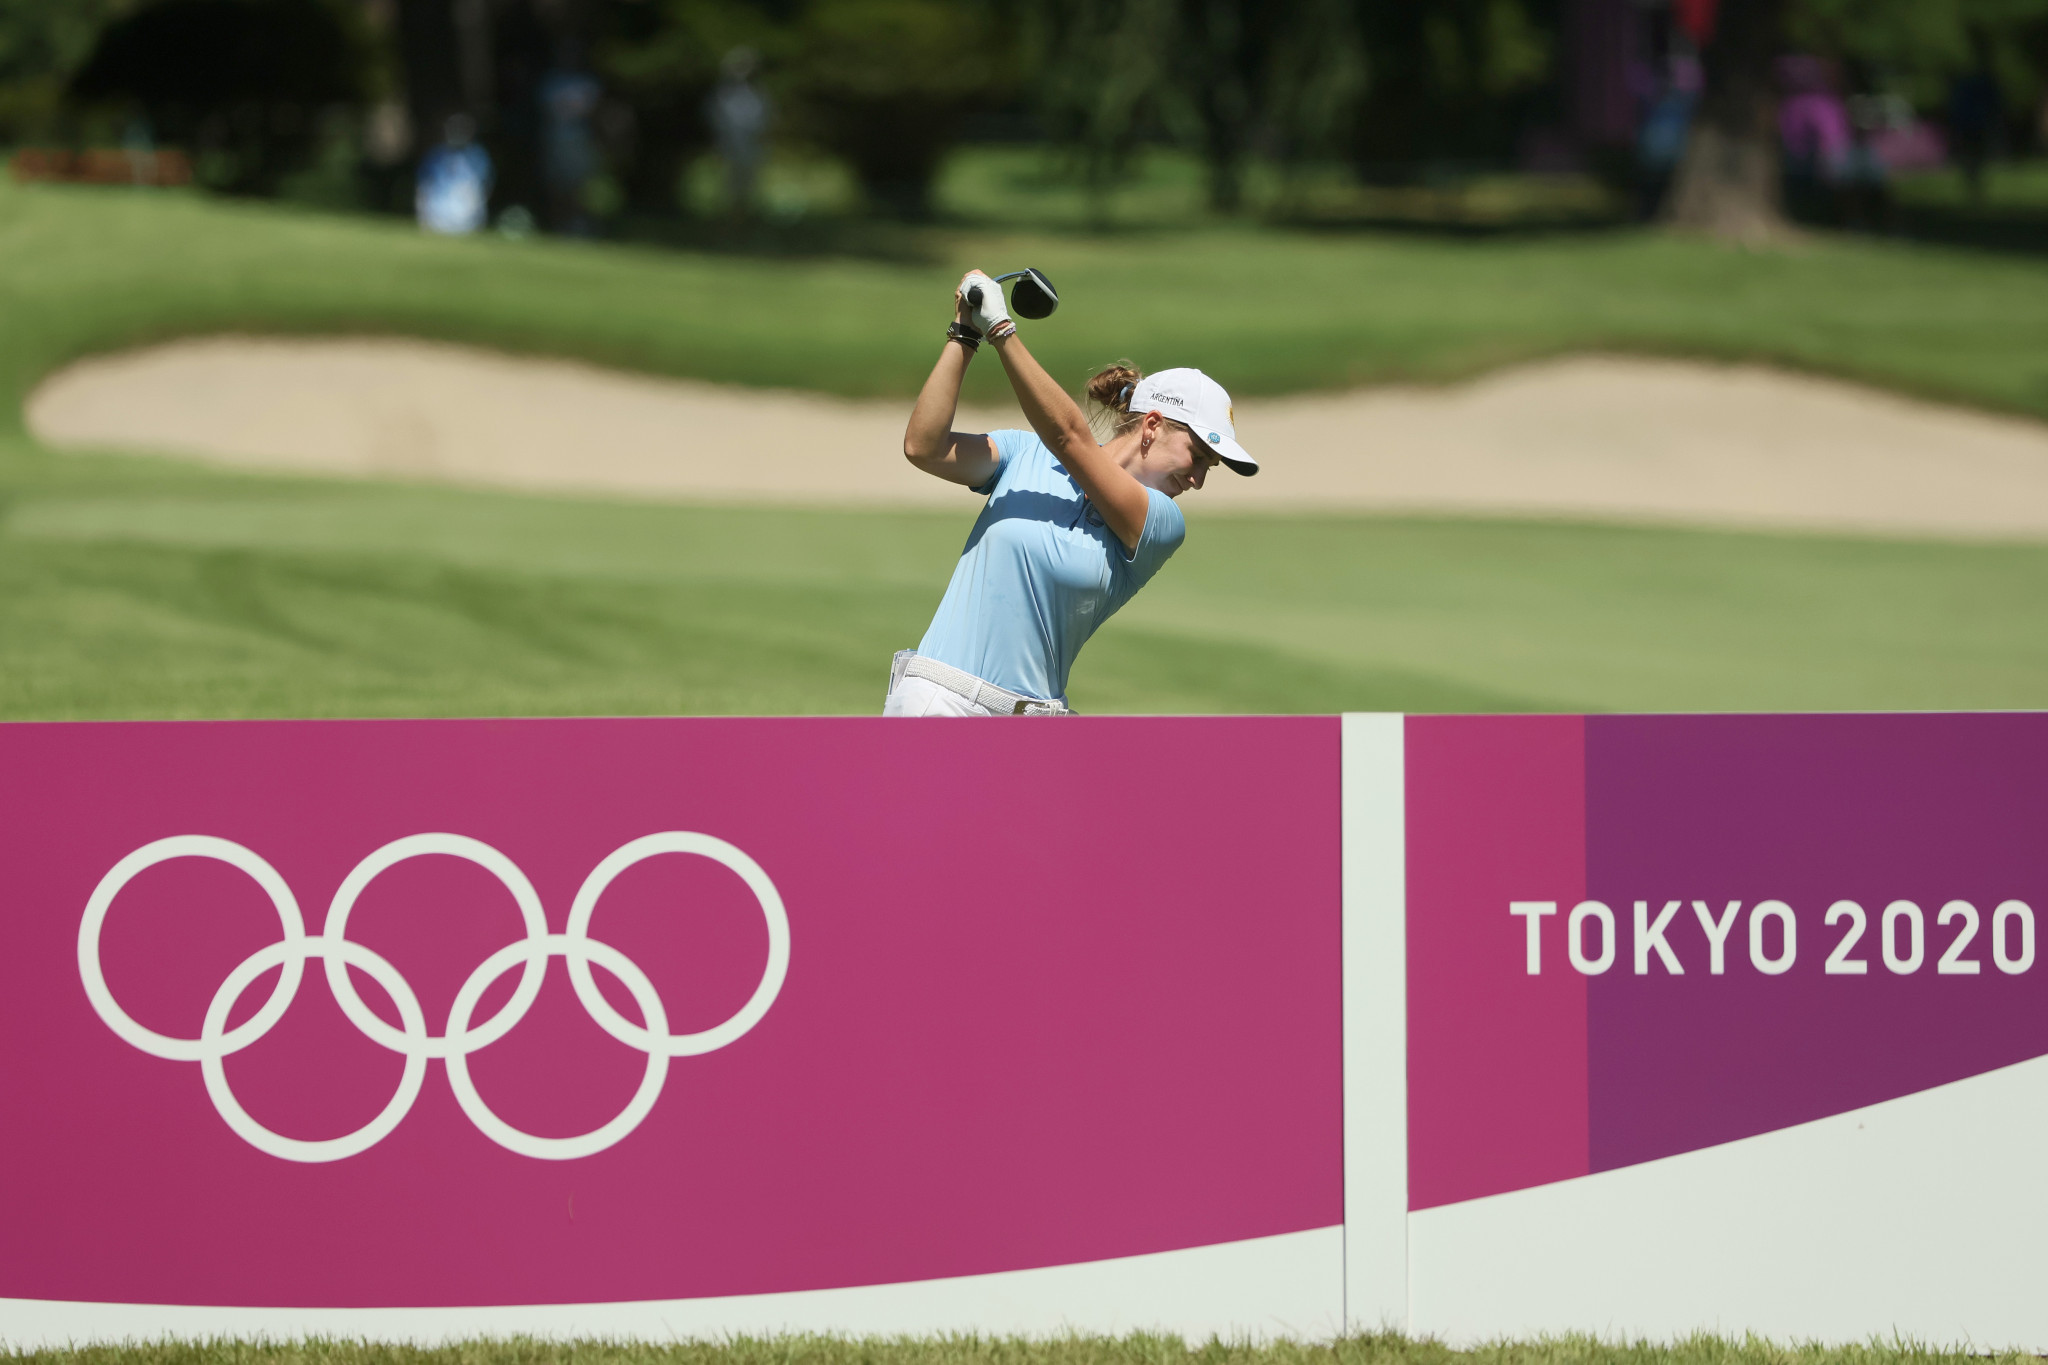 The Argentine Golf Federation received an award during the Women in Sports Commission celebratory breakfast for their efforts to enable Magdalena Simmermacher to compete in the women's golf tournament at the Tokyo 2020 Olympics ©Getty Images